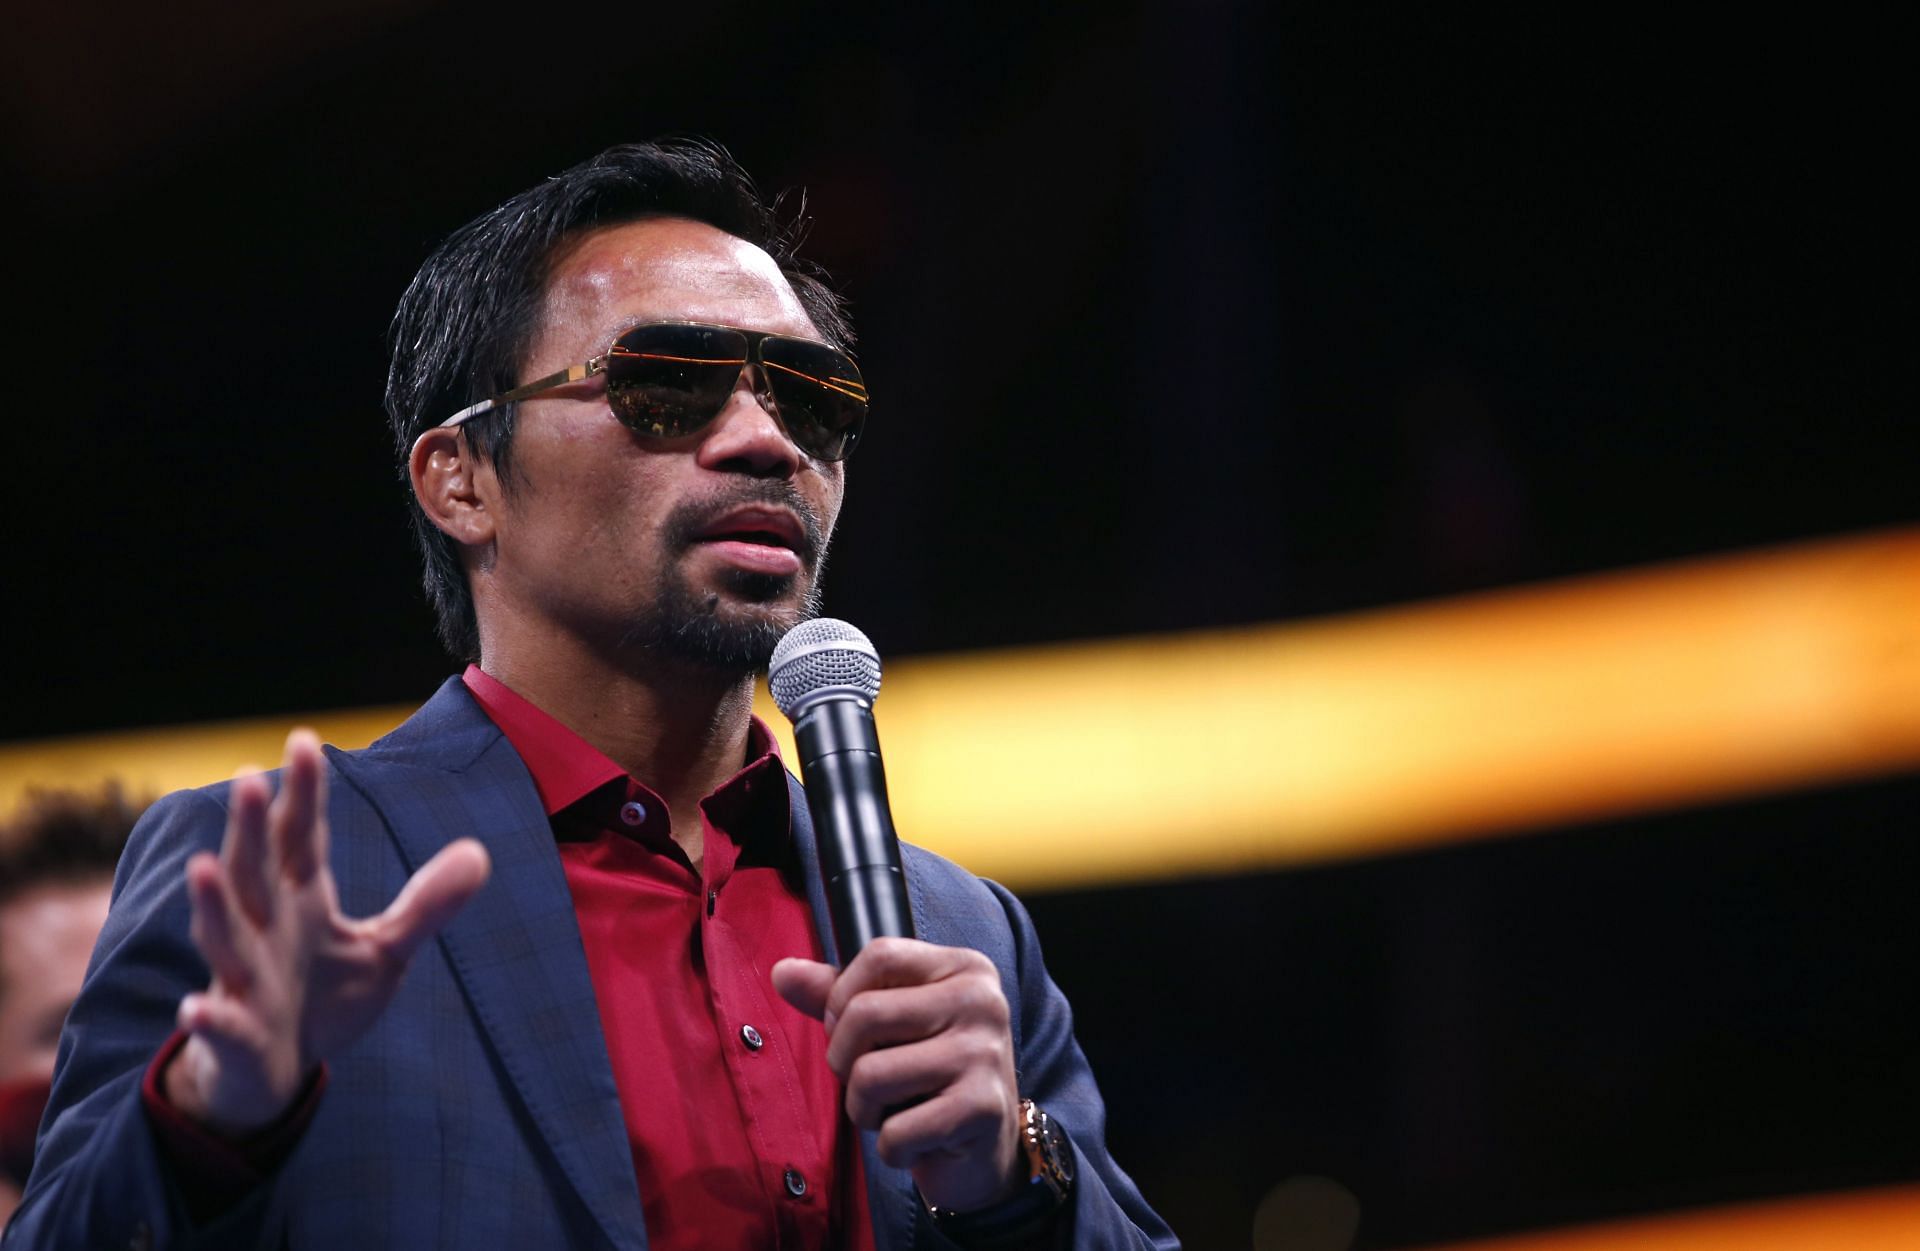 Manny Pacquiao is running for President of the Philippines